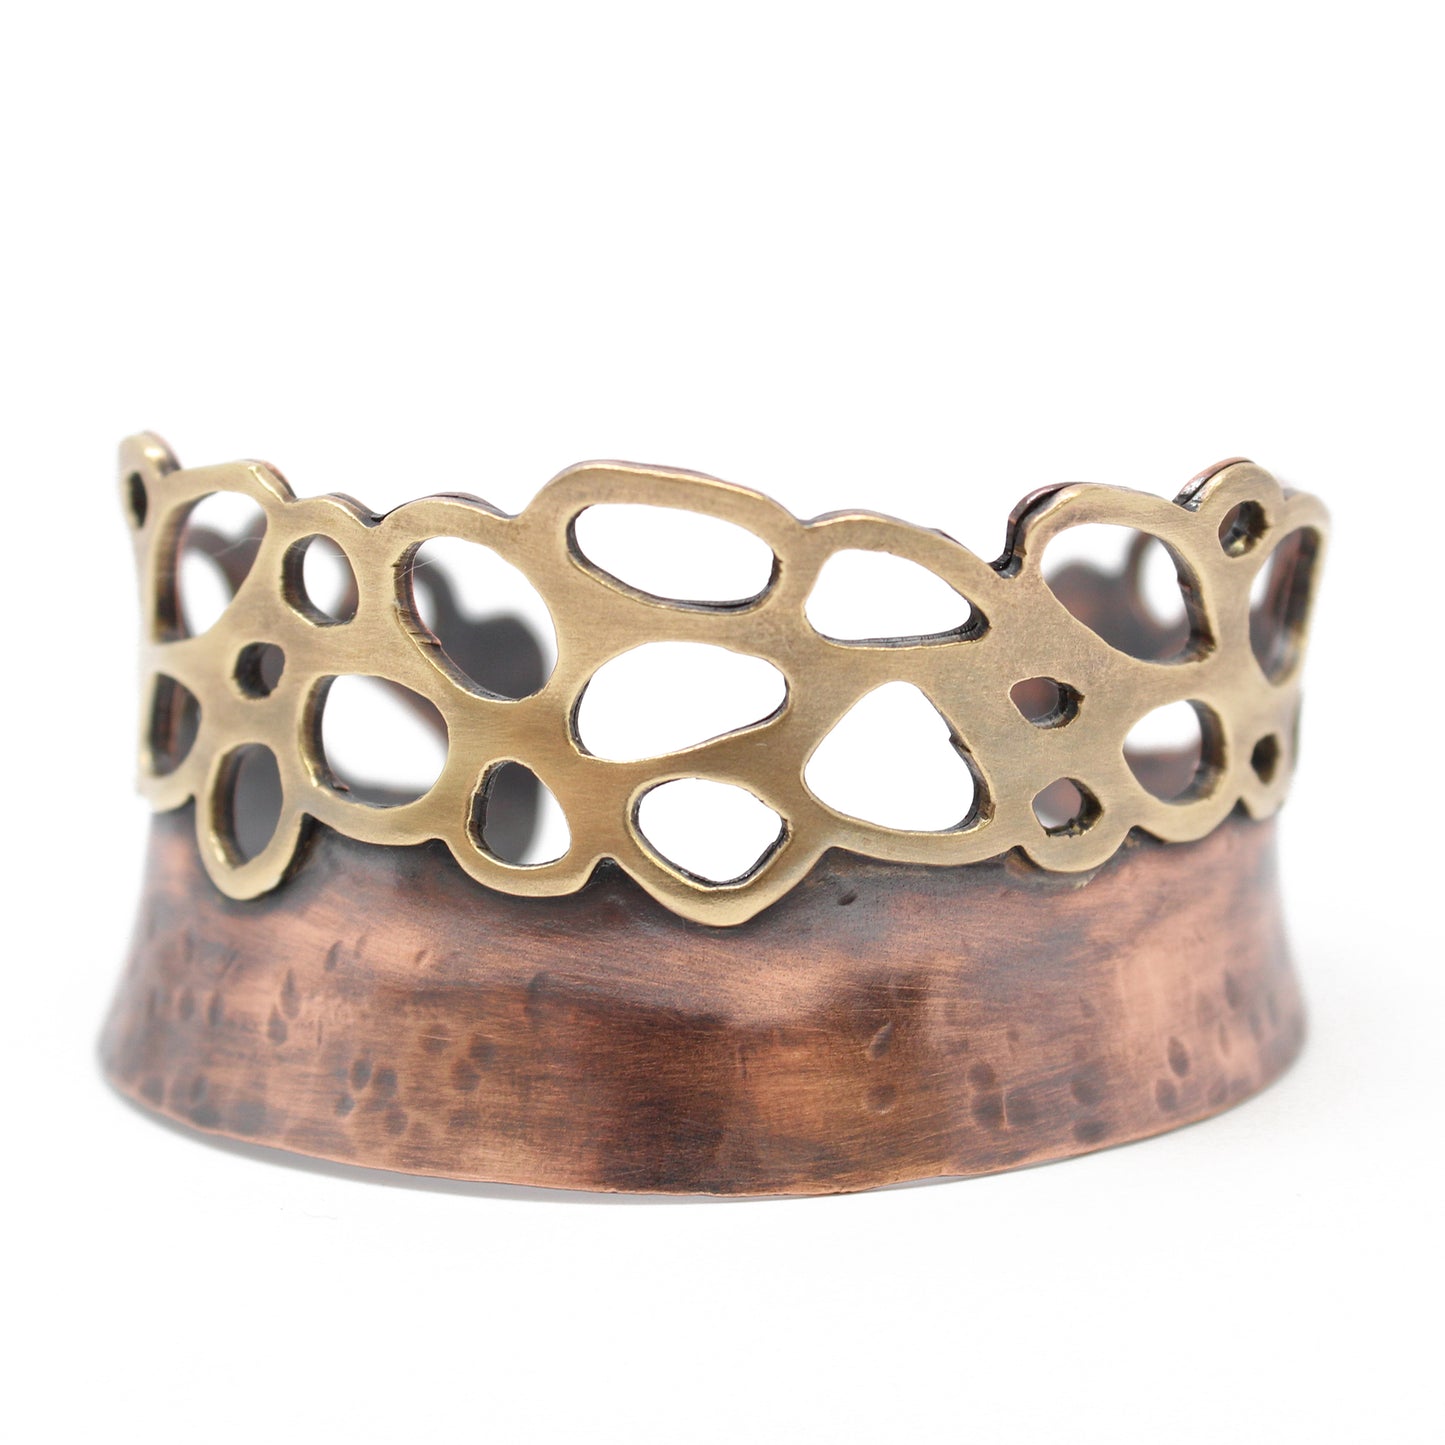 Wide Copper Cuff Bracelet with Brass Accents